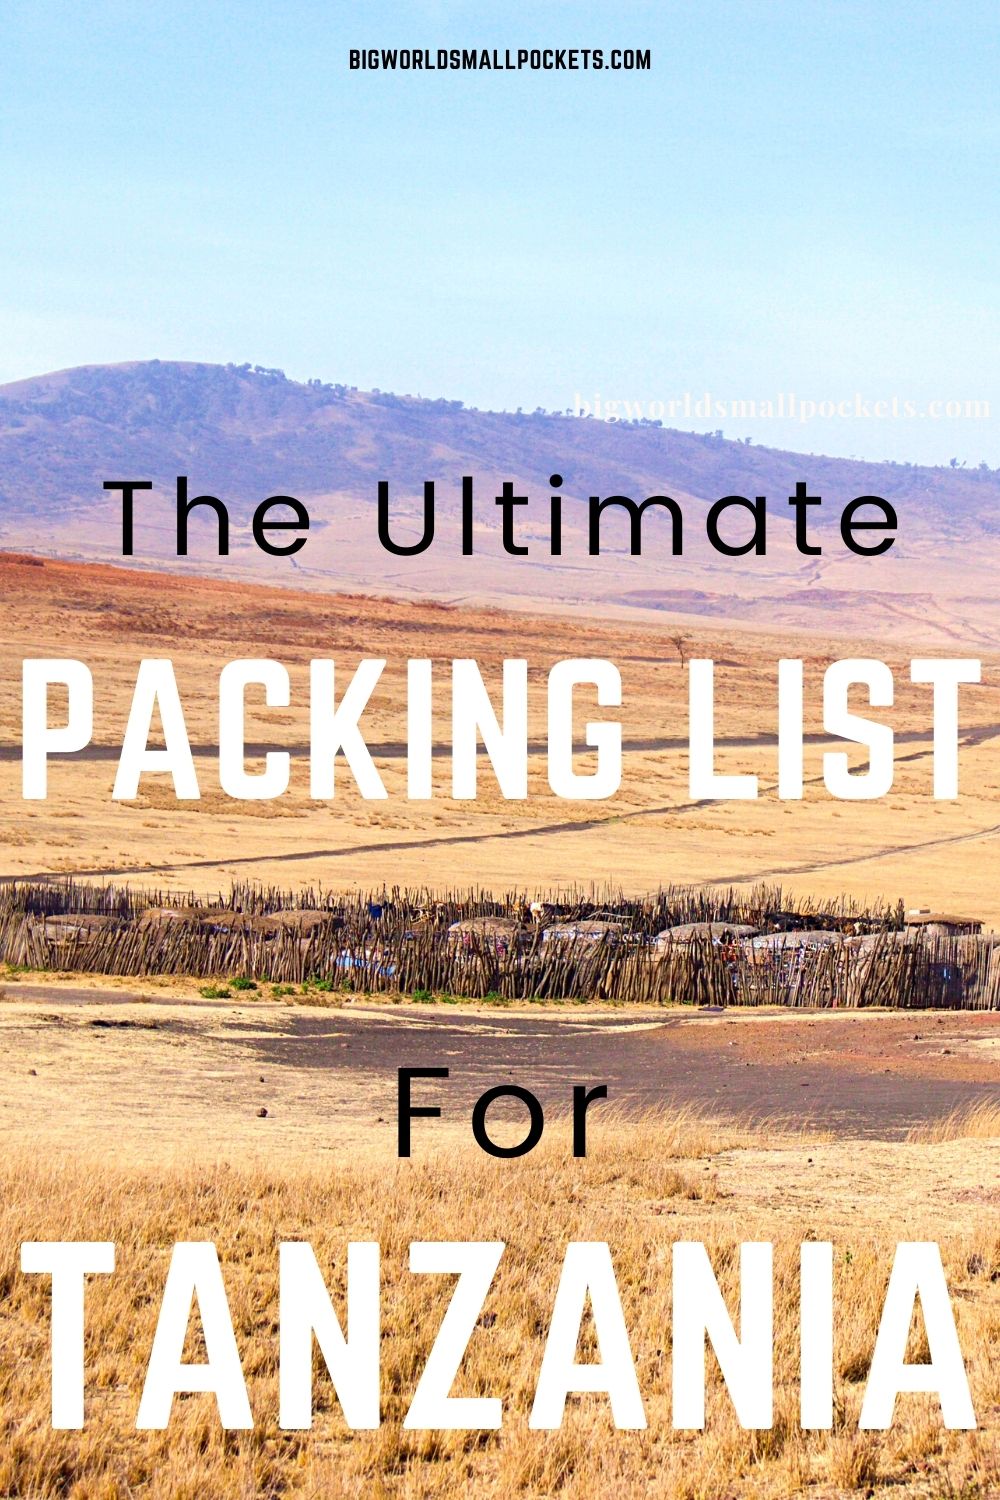 The Ultimate Tanzania Packing List